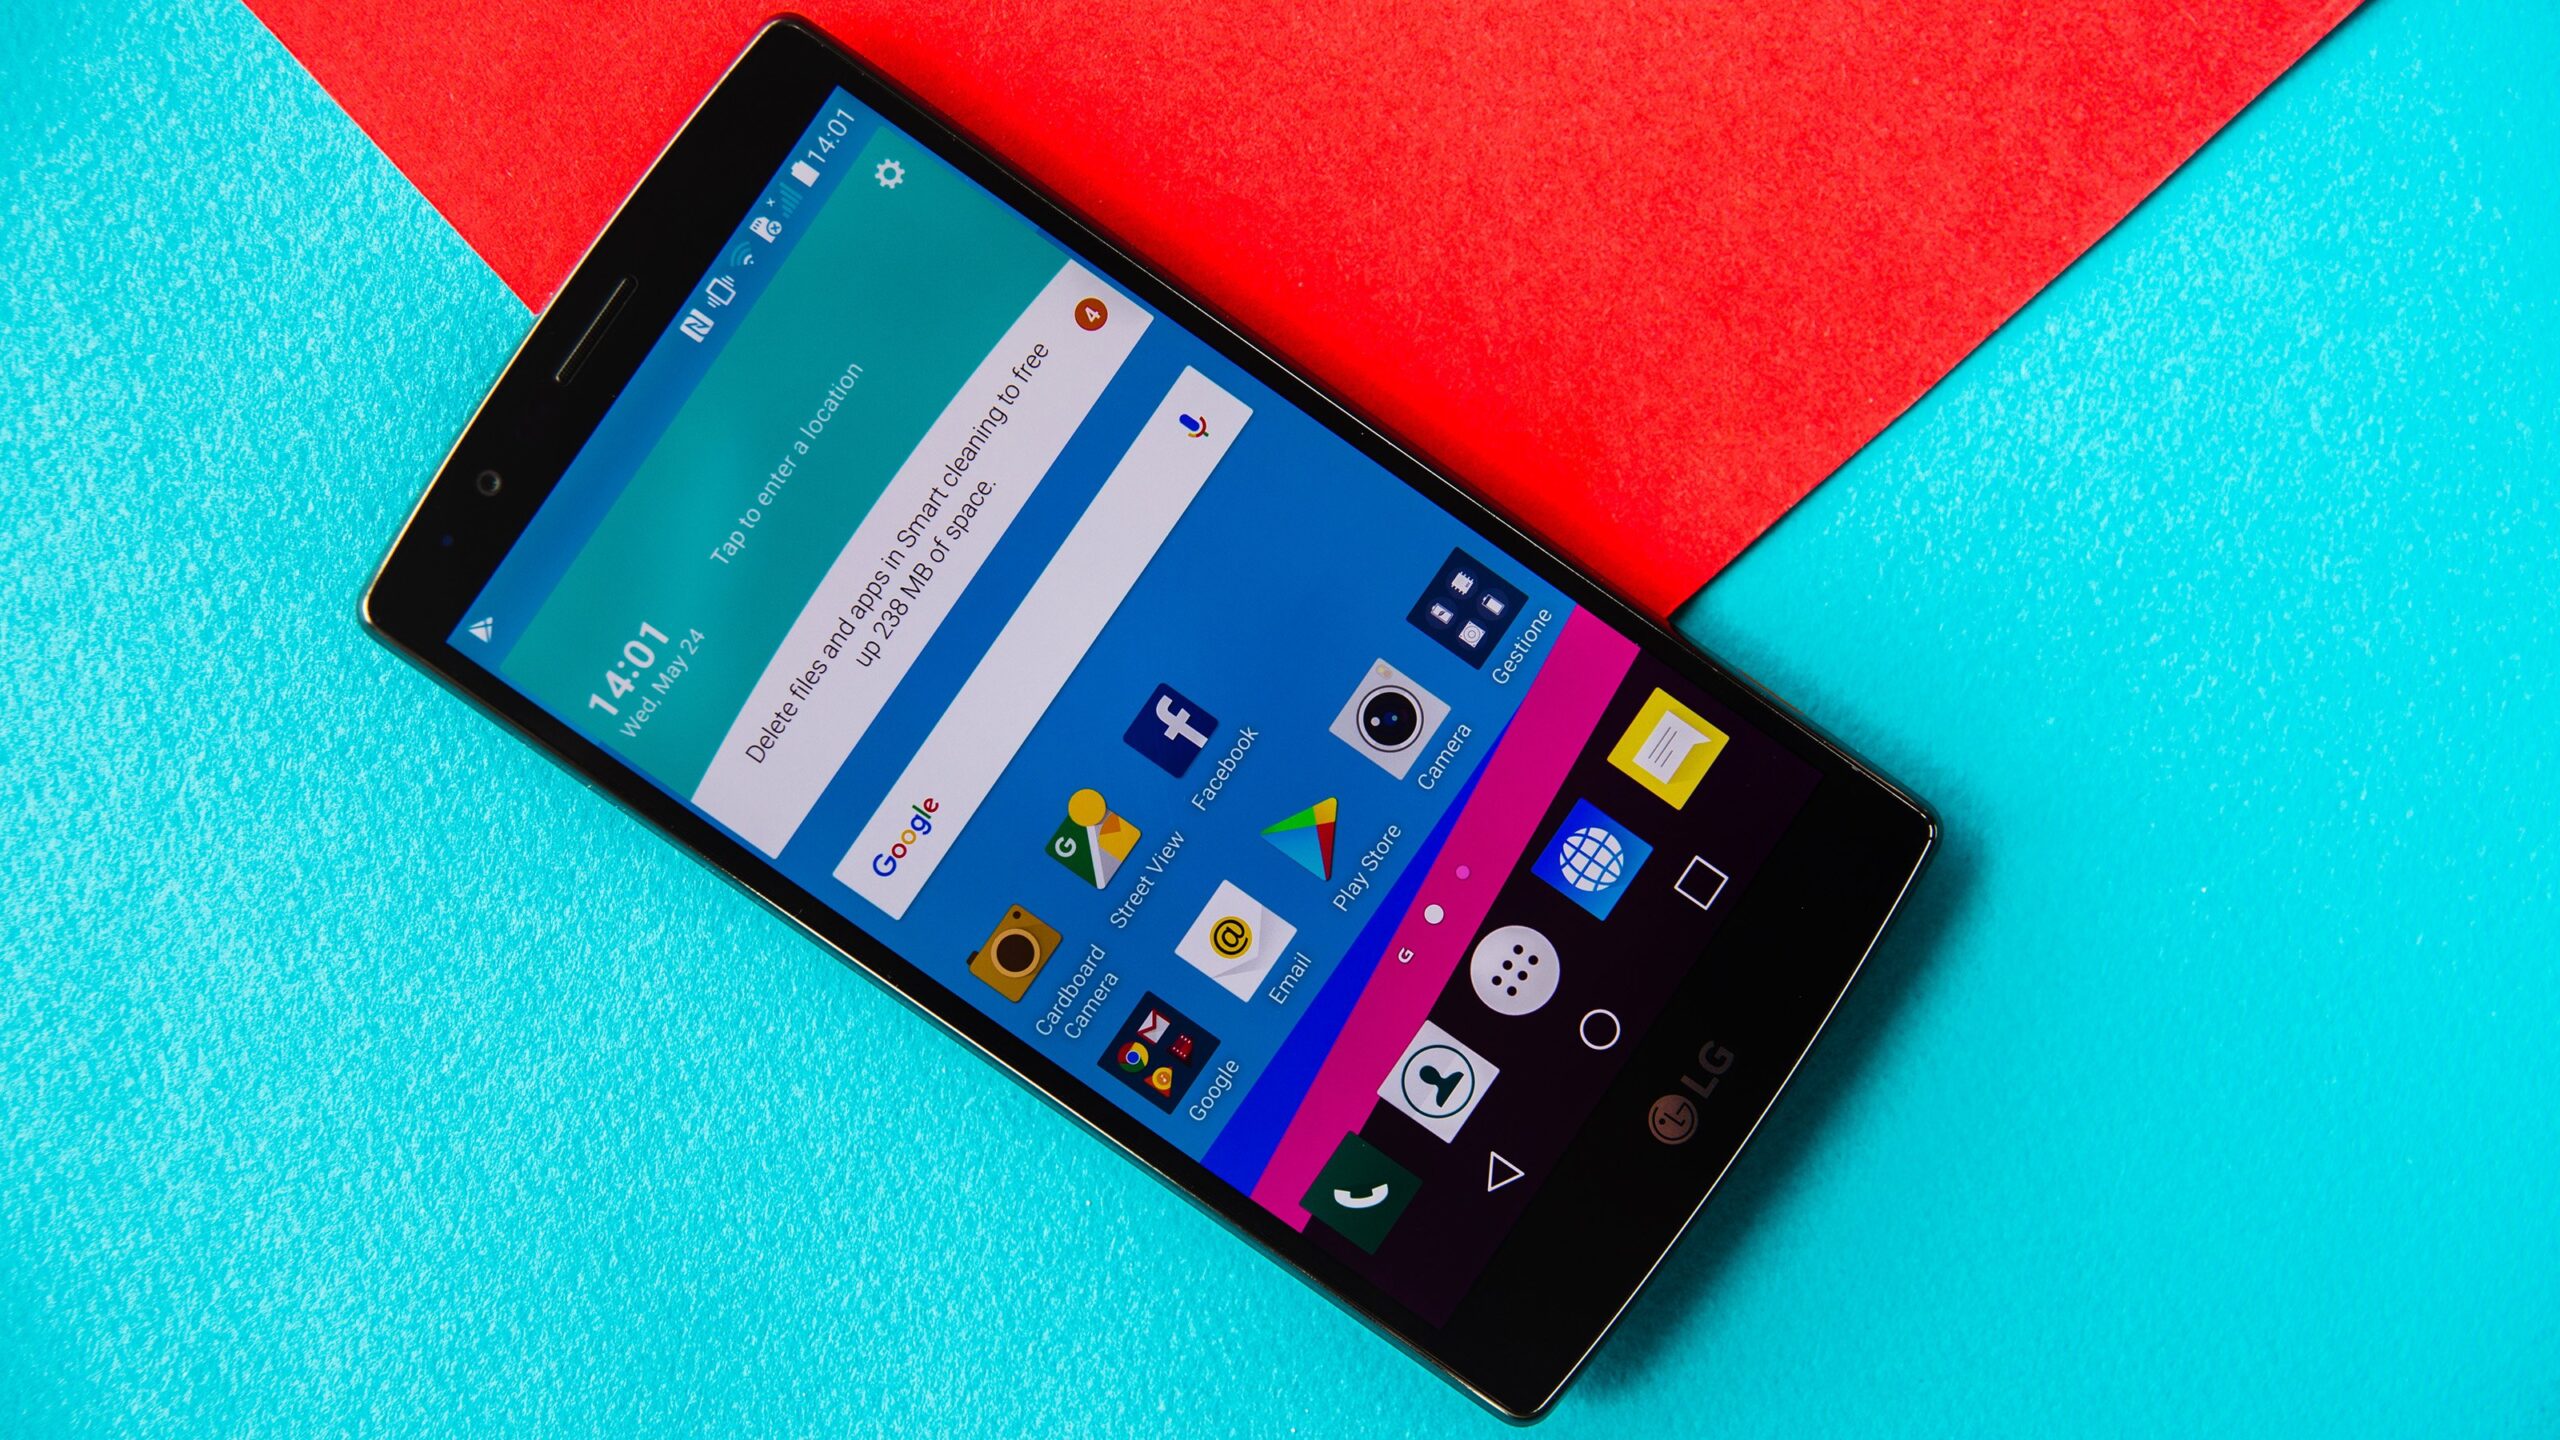 Is it worth investing in the LG G4 now?